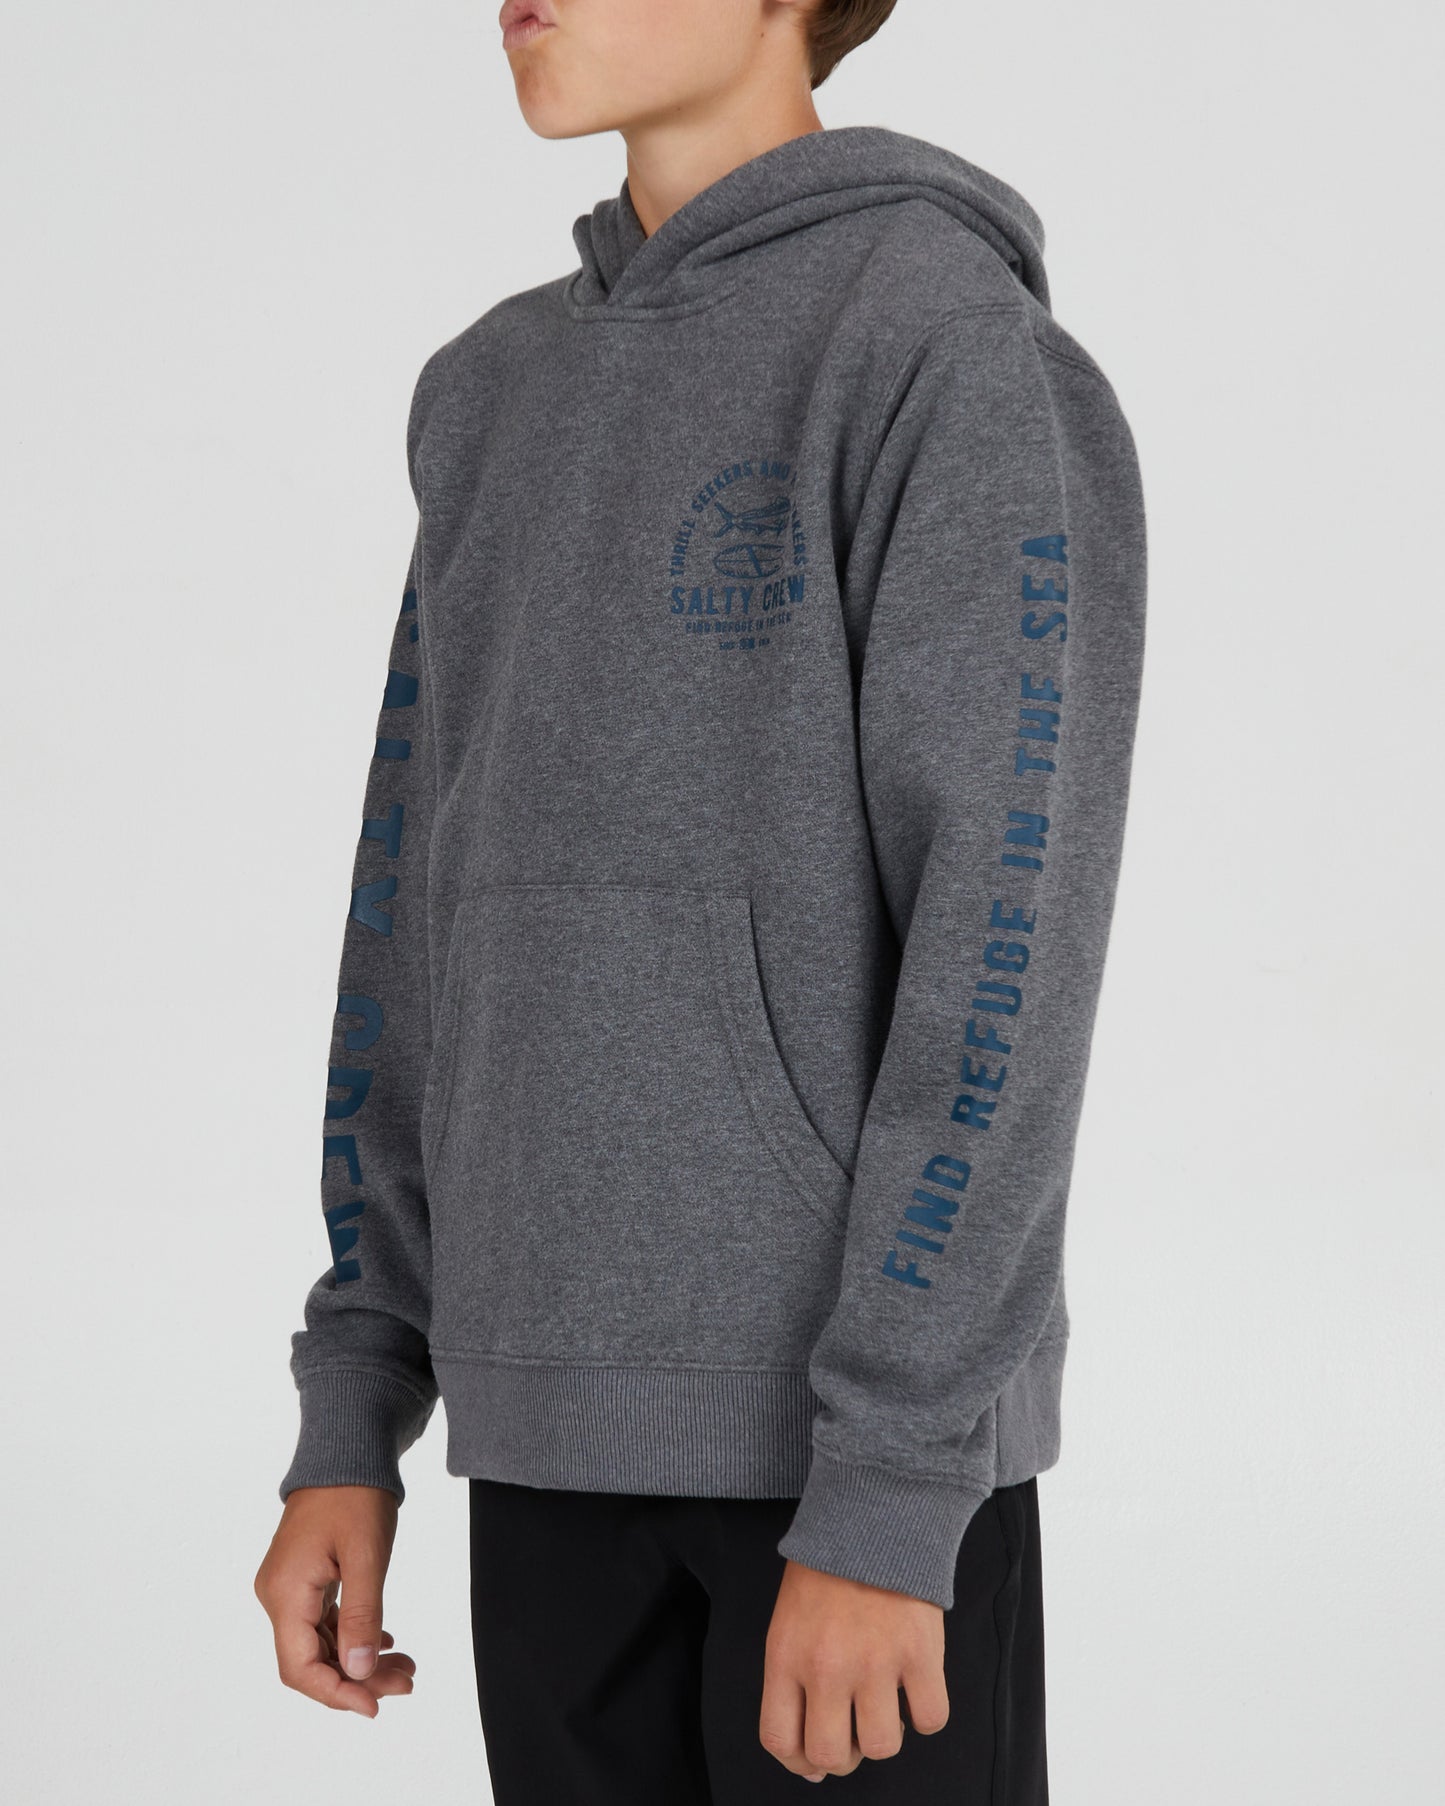 On body front angled view of the Lateral Line Boys Gunmetal Heather Hooded Fleece